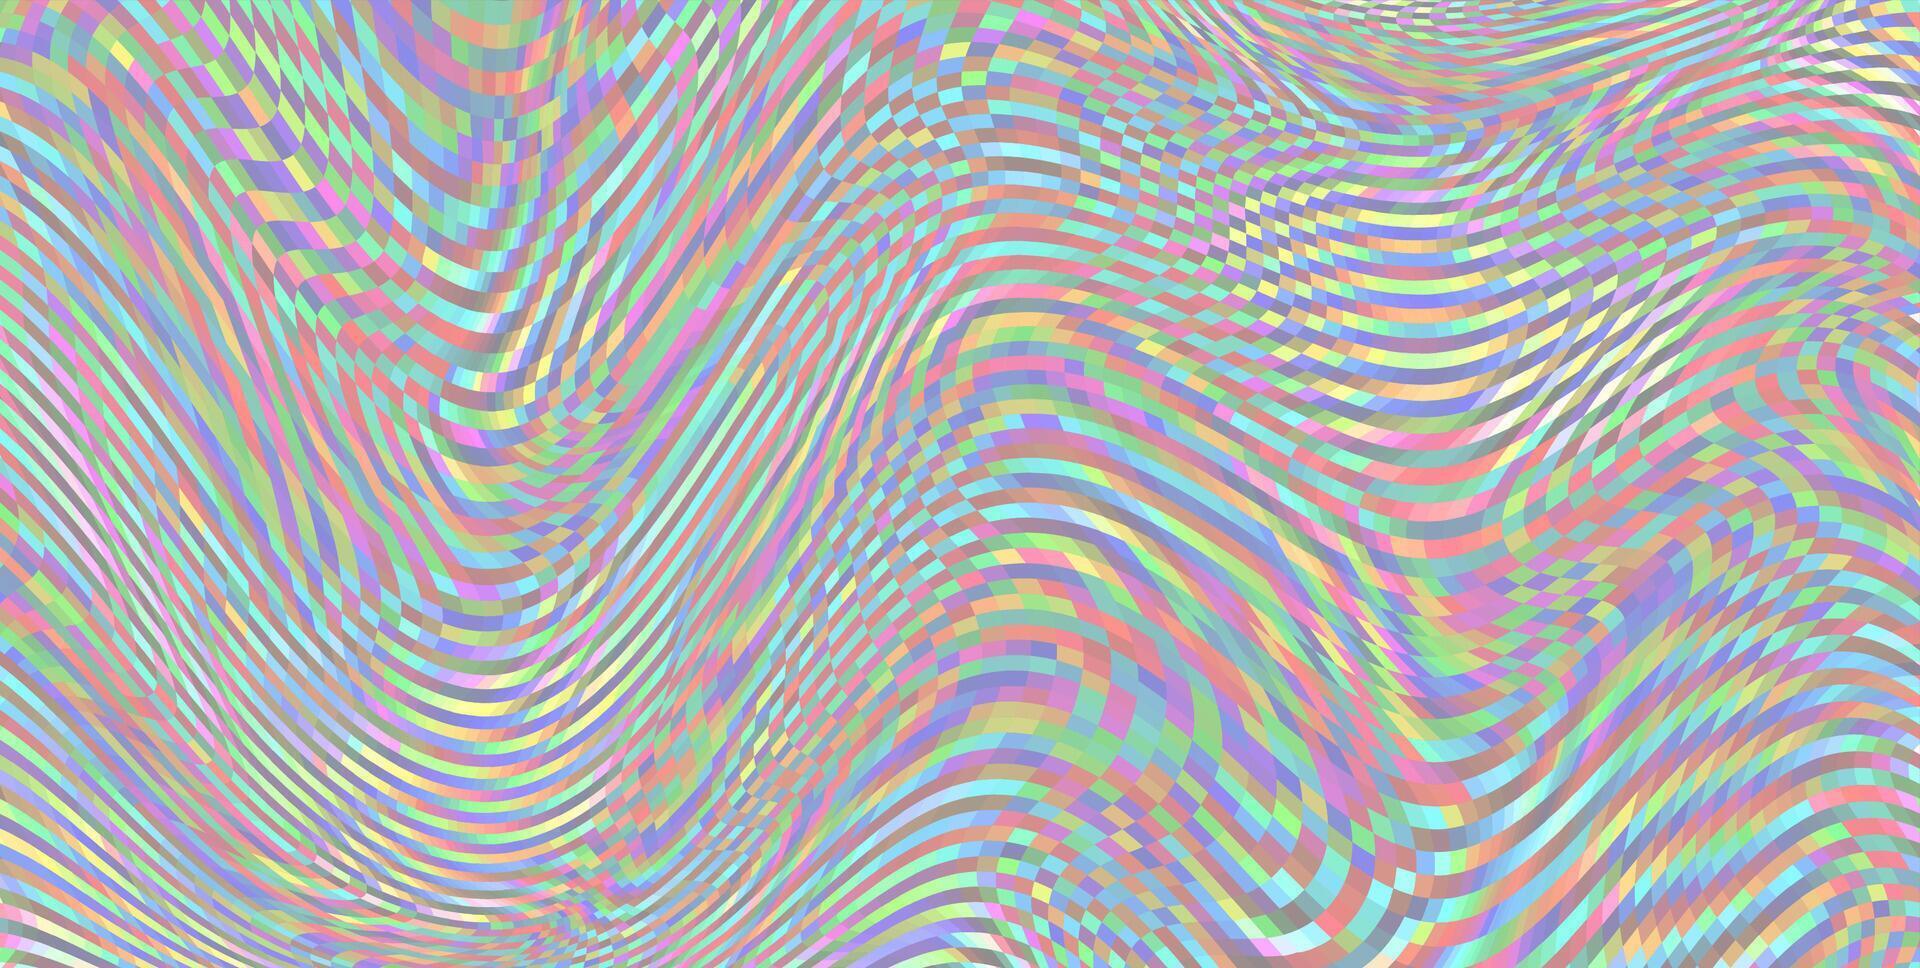 Glitch pattern background with fluid holographic colors and geometric patterns. Abstract digital art with flowing distorted lines and pixel noise. . vector